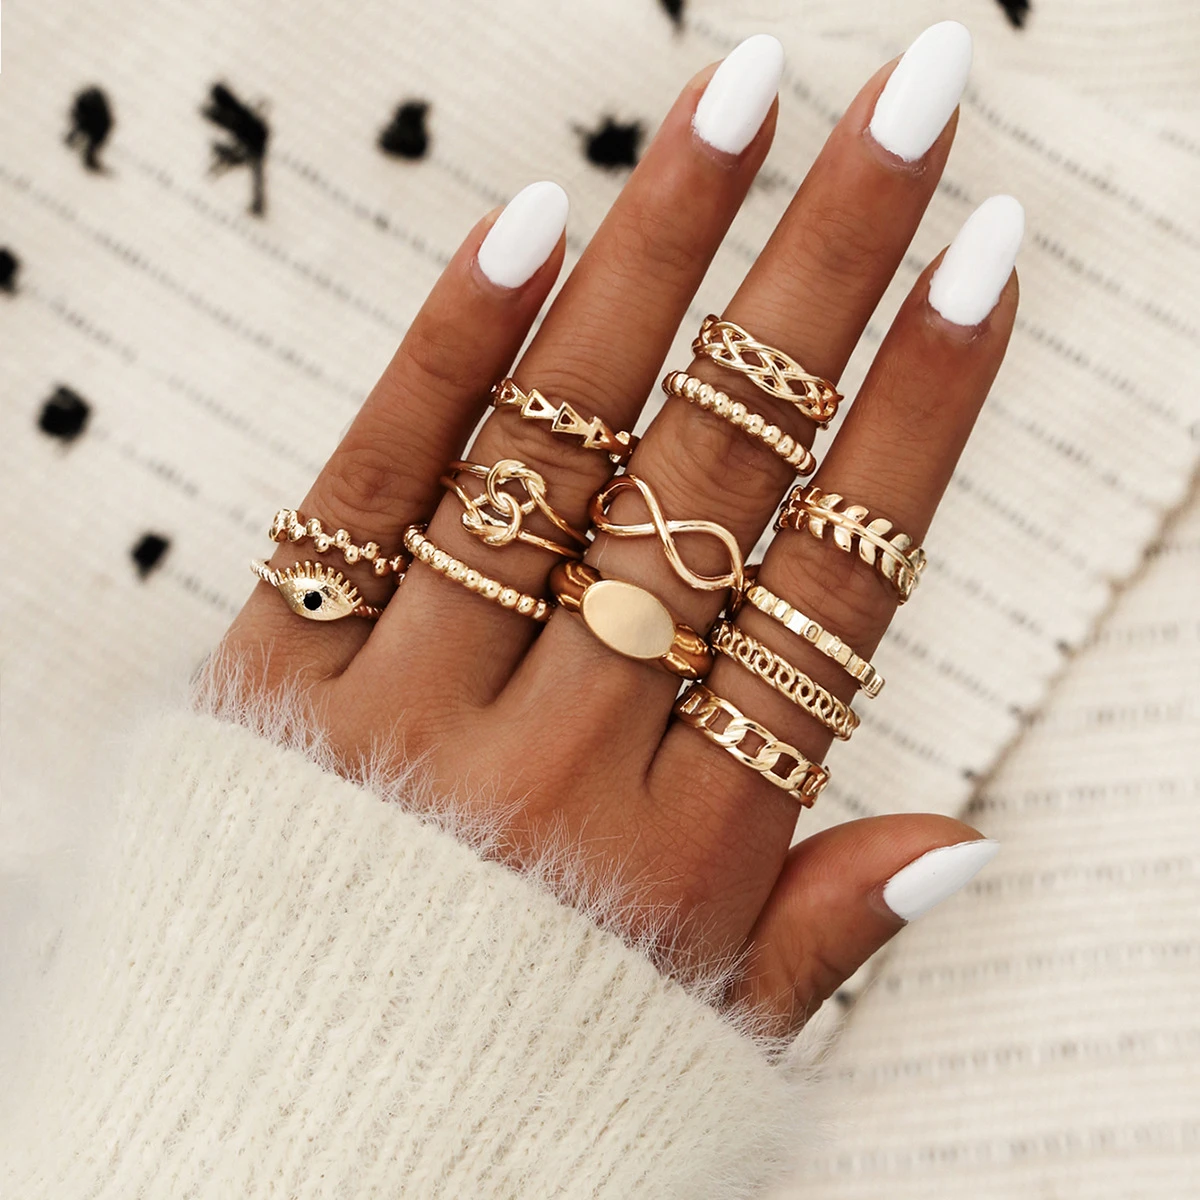 Post sap Noord West bohemian style gold rings for girls boho jewelry women evil eye ring  slytherin ring set anillos finger bague schmuck accessories|Rings| -  AliExpress